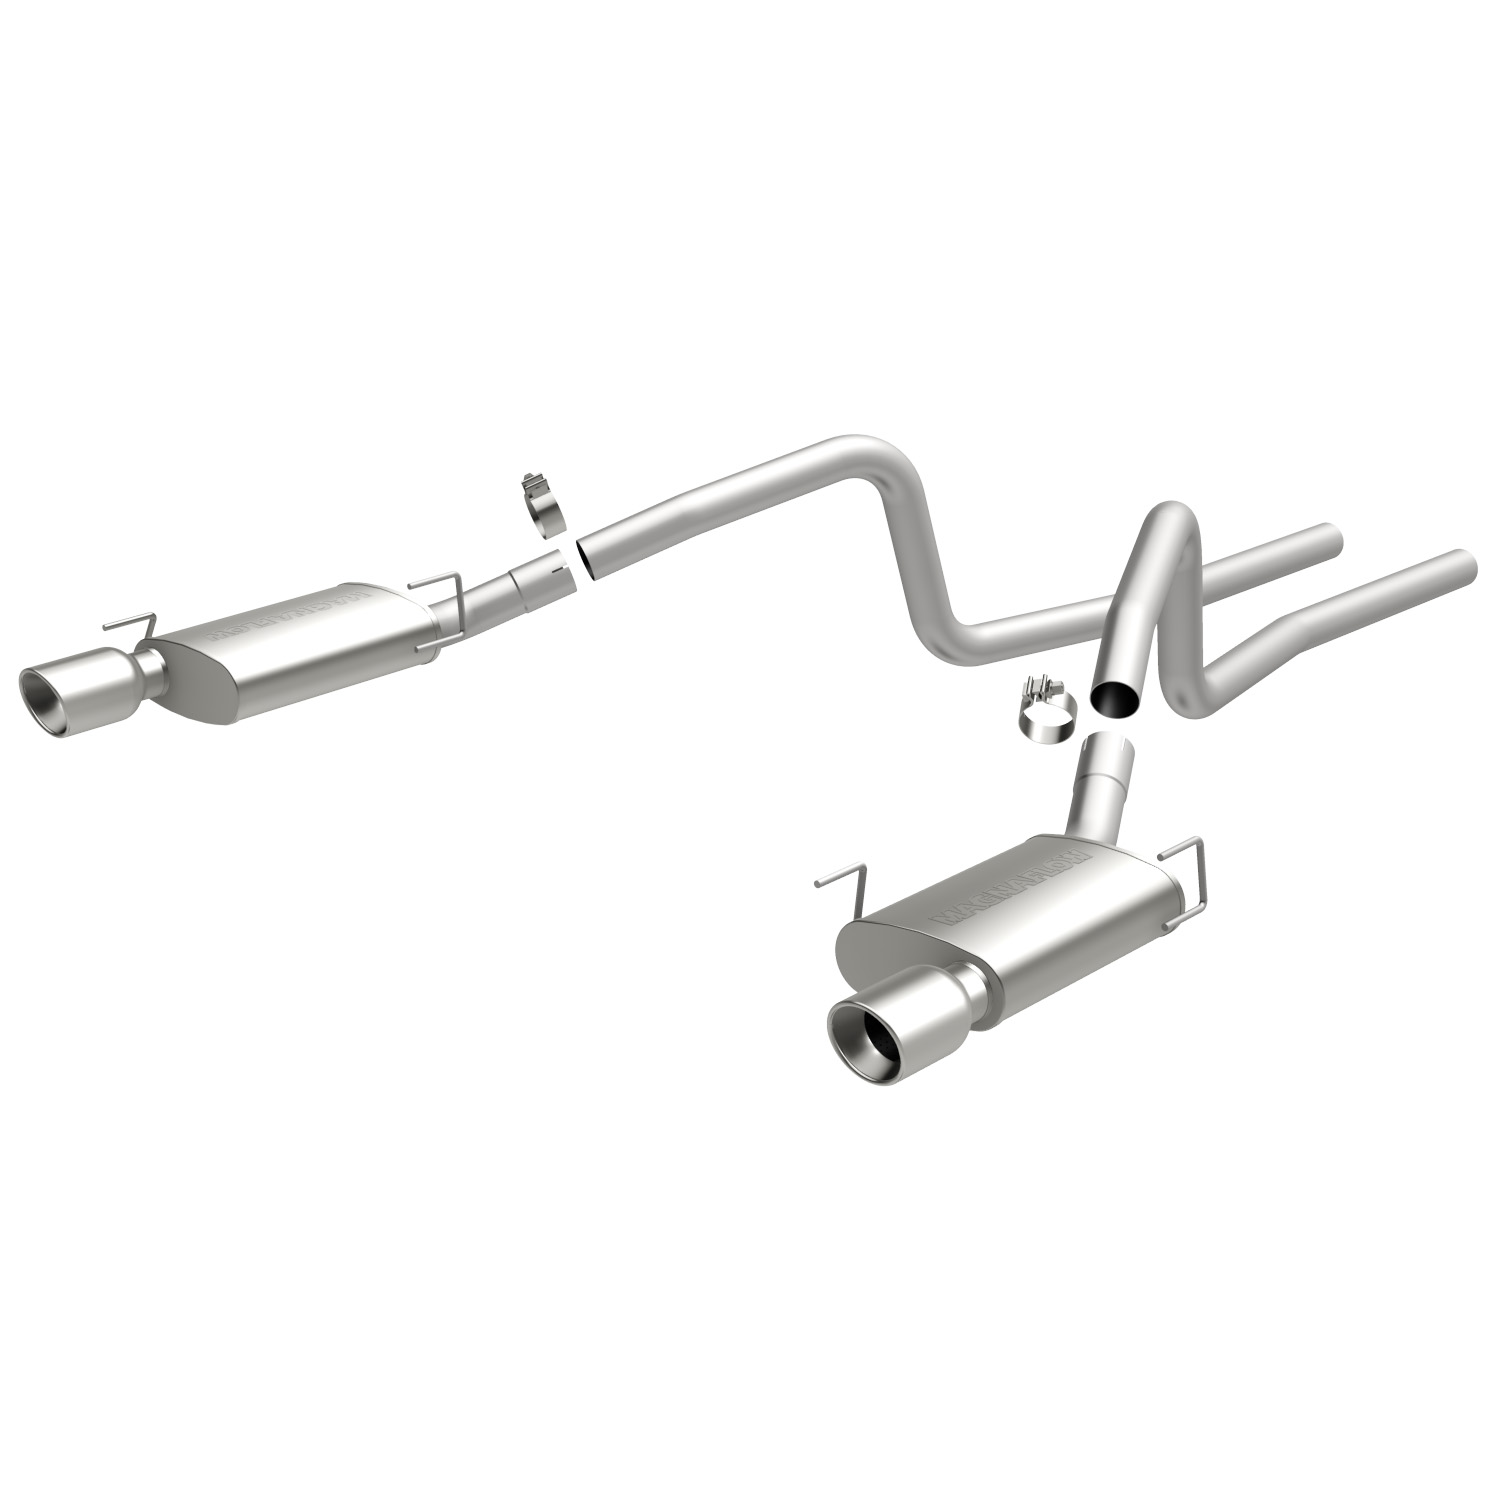 Street Series Cat-Back Exhaust System 2010 Mustang GT 4.6L/Roush Supercharged 427R